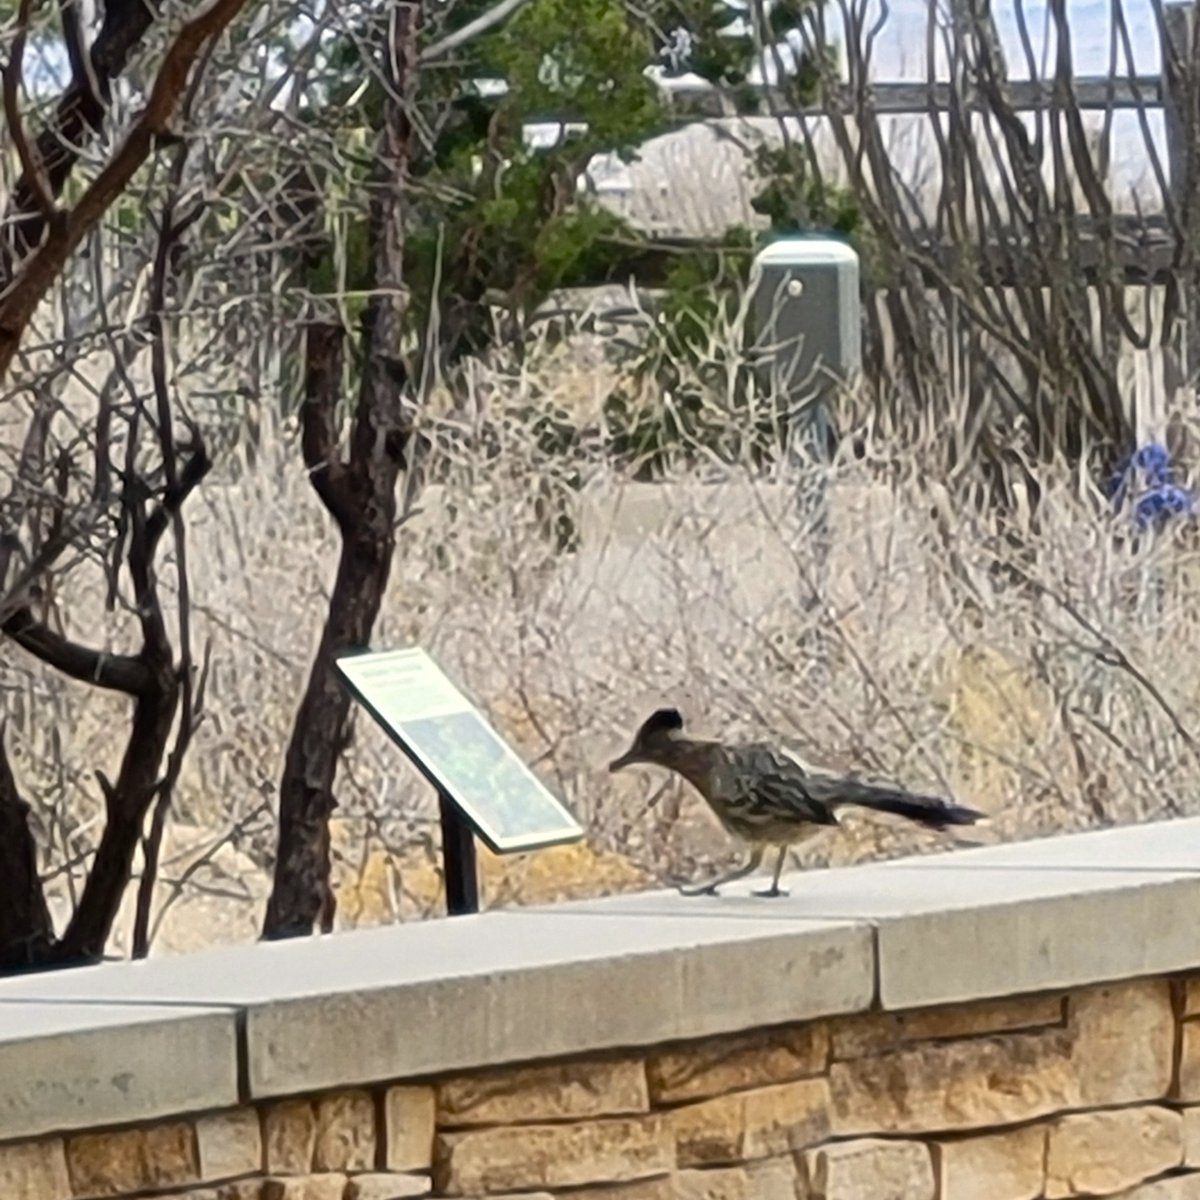 Even this Roadrunner know that Carlsbad Caverns is more than just a cave park and is trying to learn about the local plants and animals that live here. We encourage you to do the same on your visit to Carlsbad Caverns National Park. Photo: NPS #CarlsbadCaverns #FindYourPark